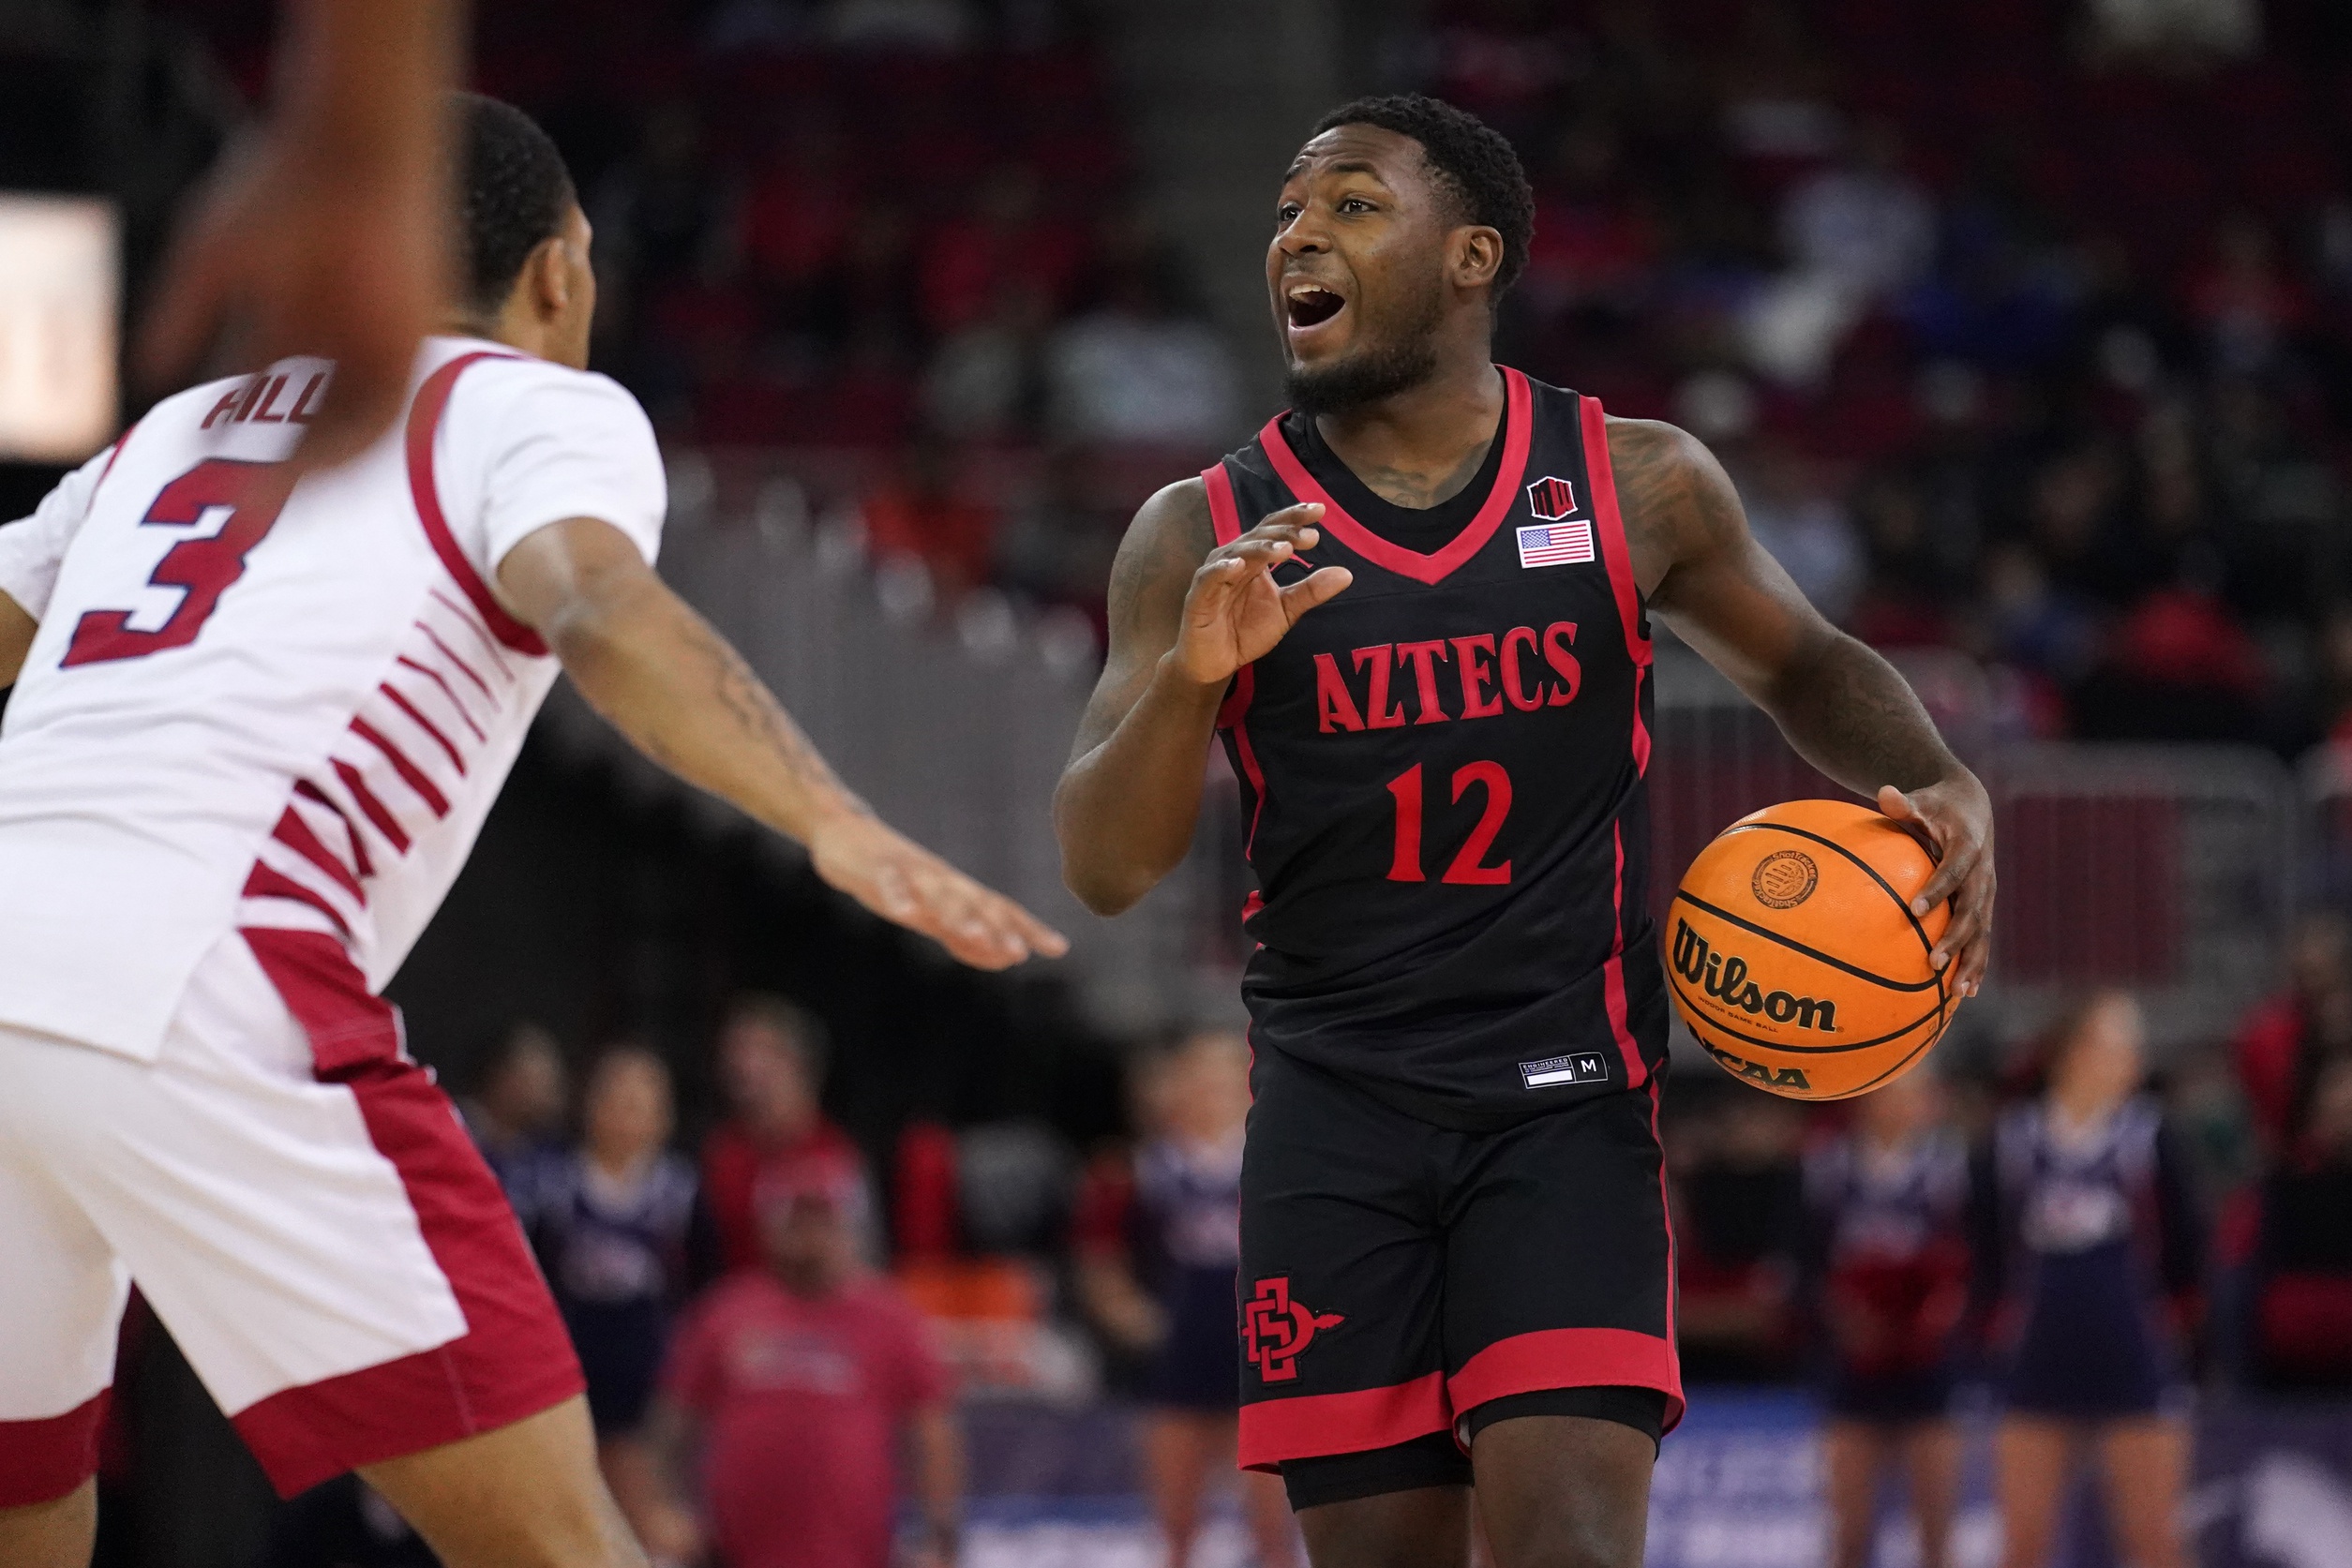 Colorado State Rams vs San Diego State Aztecs Prediction, 3/9/2023 College Basketball Picks, Best Bets & Odds